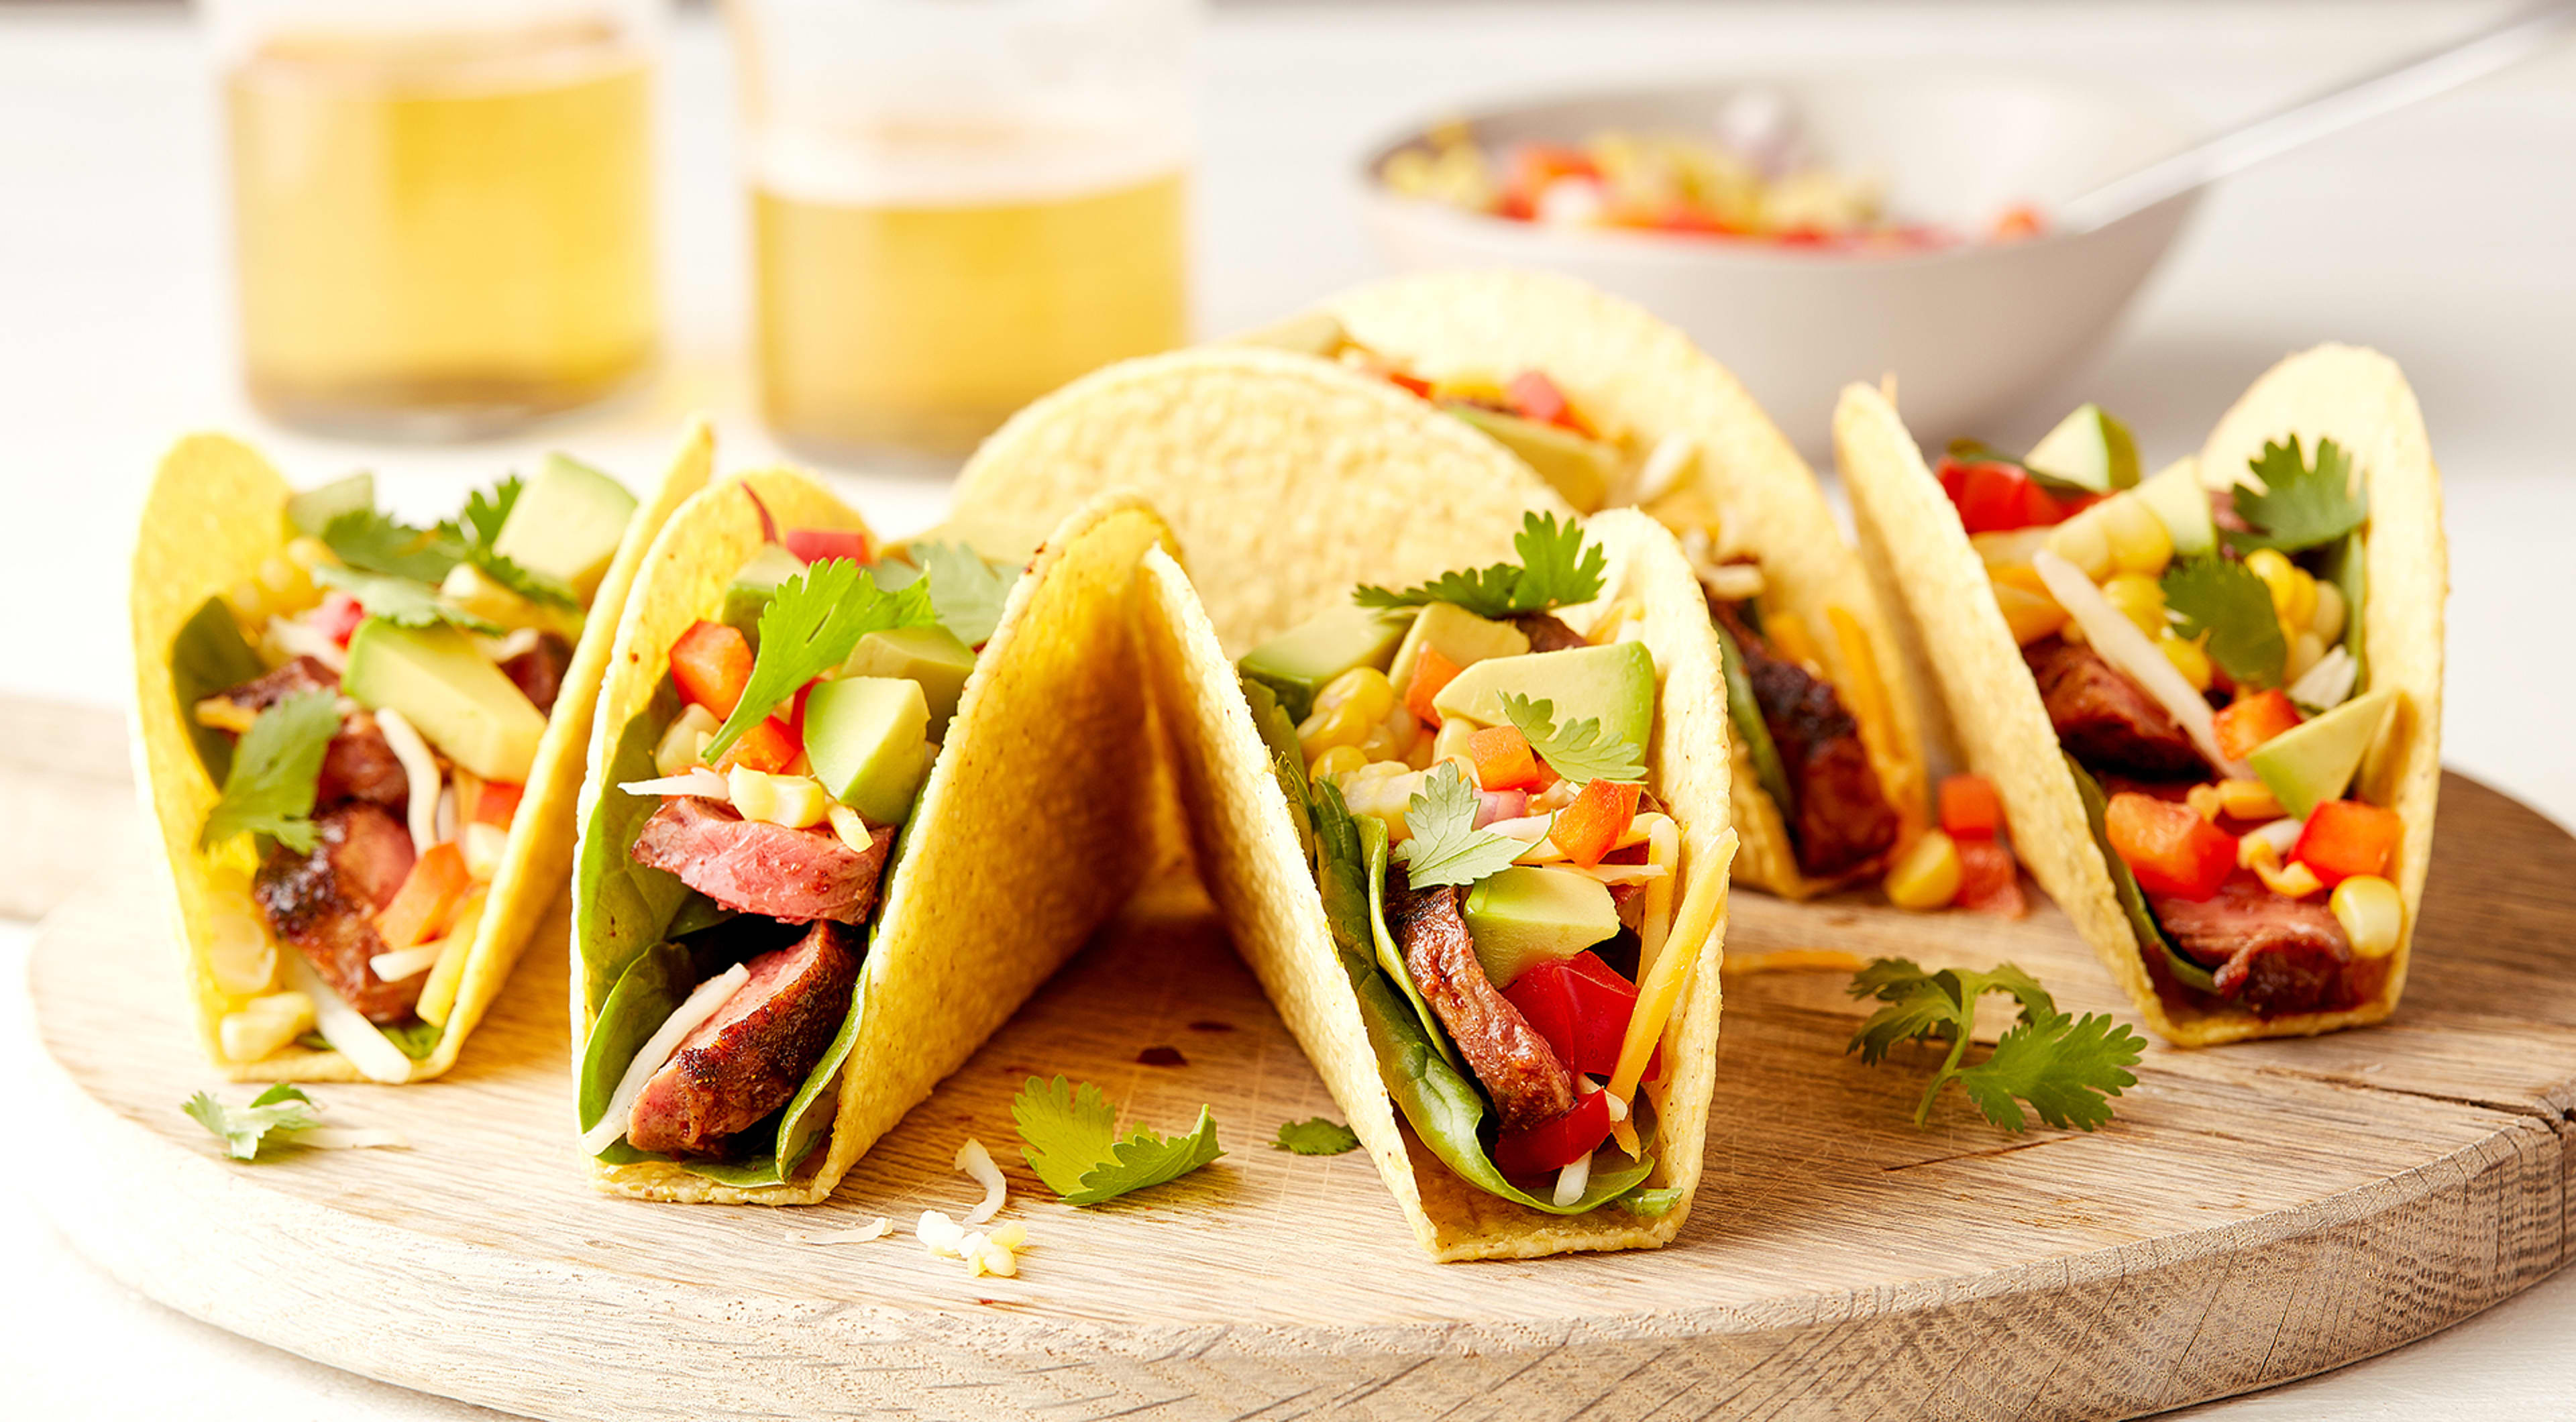 GRILLED STEAK TACOS WITH CORN SALSA